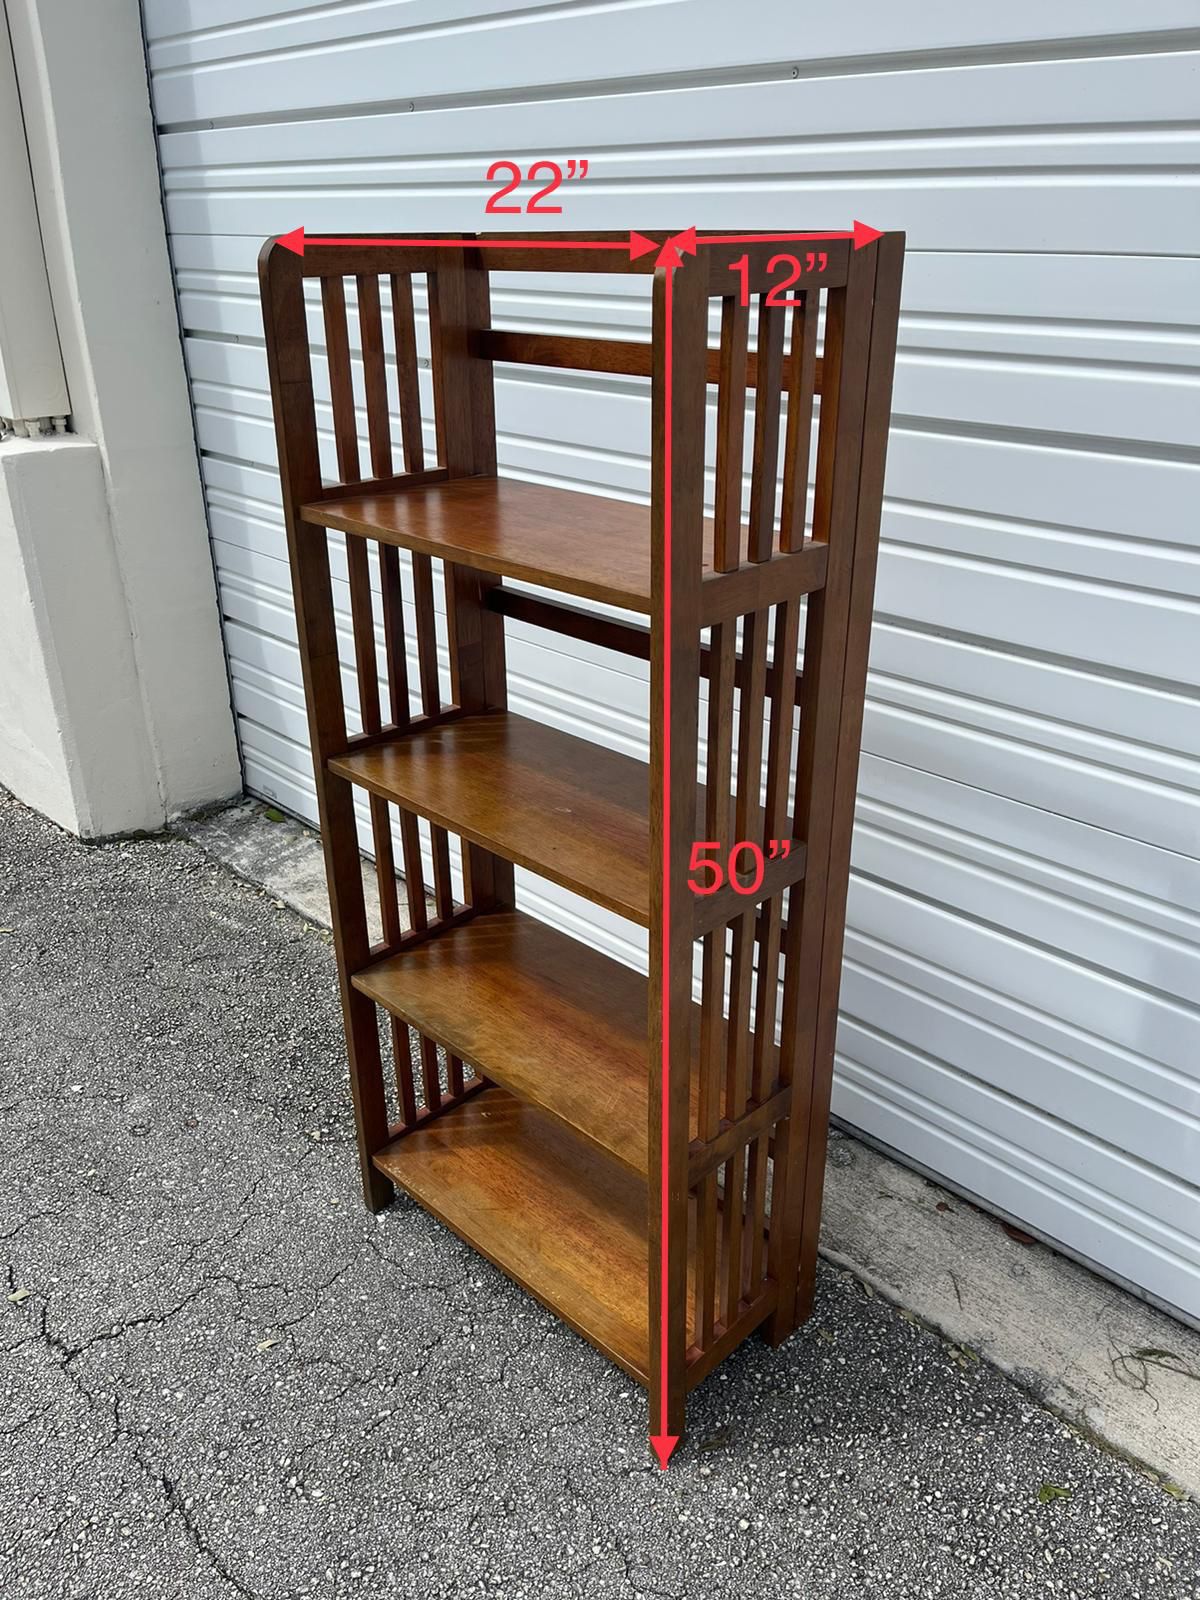 WOODEN BOOKSHELF WITH 4 SHELVES - delivery is negotiable